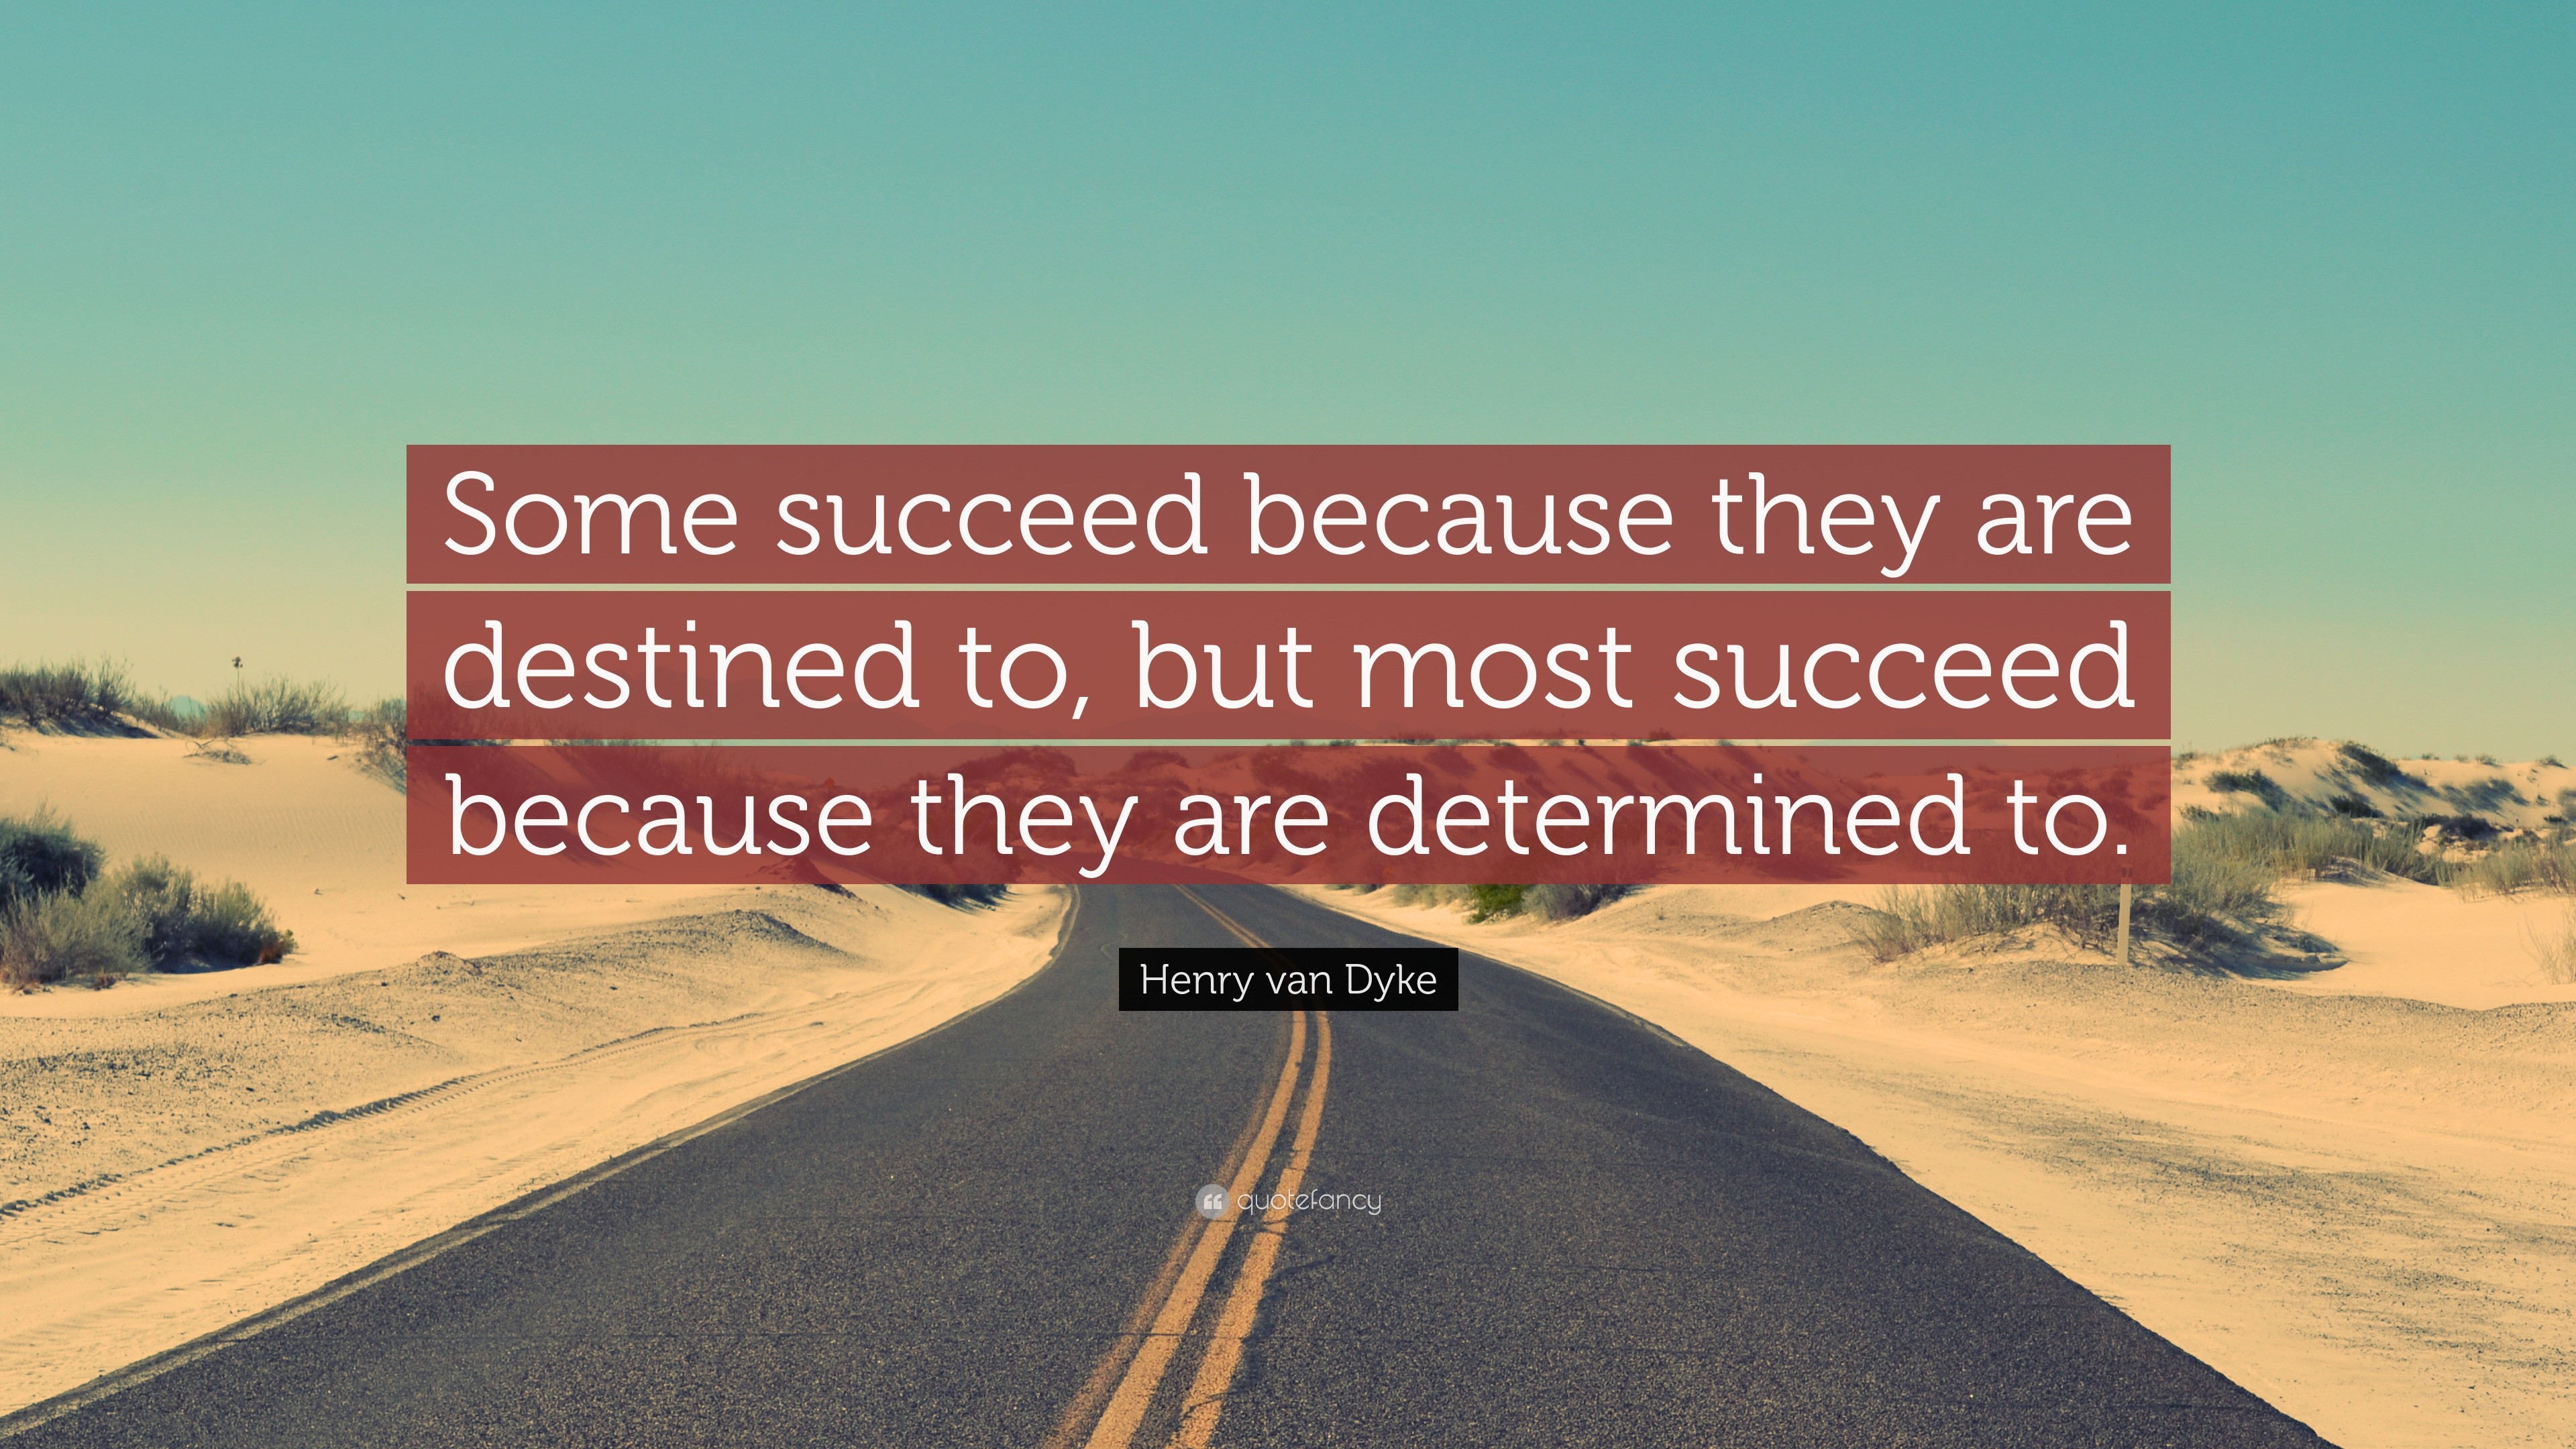 Henry van Dyke Quote: “Some succeed because they are destined to, but ...